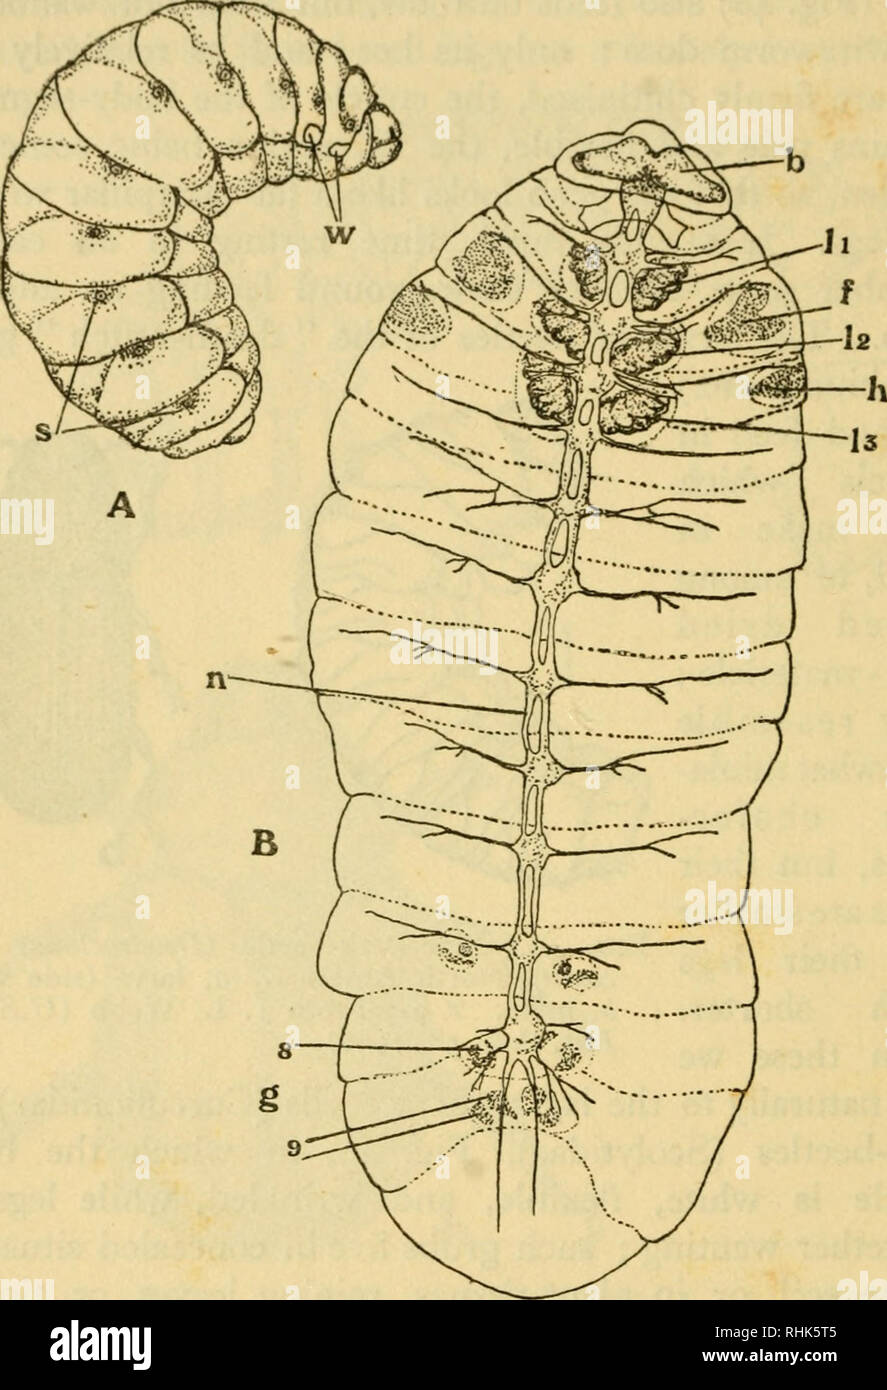 . The biology of insects. Insects -- Biology. i8o THE BIOLOGY OF INSECTS Among the two-winged flies (Diptera) all the larvae are destitute of true legs, and in the house-fly and bluebottle group (Muscoidea) the head-region becomes so much. Fig. 50.—Larva of Honey Bee (Apis mellifica). A, side view, X 4 ; zv, wing-buds seen through skin; s, spiracles. B, ventral body-wall with nerve-cord (w) exposed by dissection, X 12; 6, brain ; l^, /g, I3, imaginal buds of legs, /, forewing and //, hind wing buds, in their pouches; g, 8, 9, developing gonapophyses (processes of ovipositor). After J. A. Nelso Stock Photo